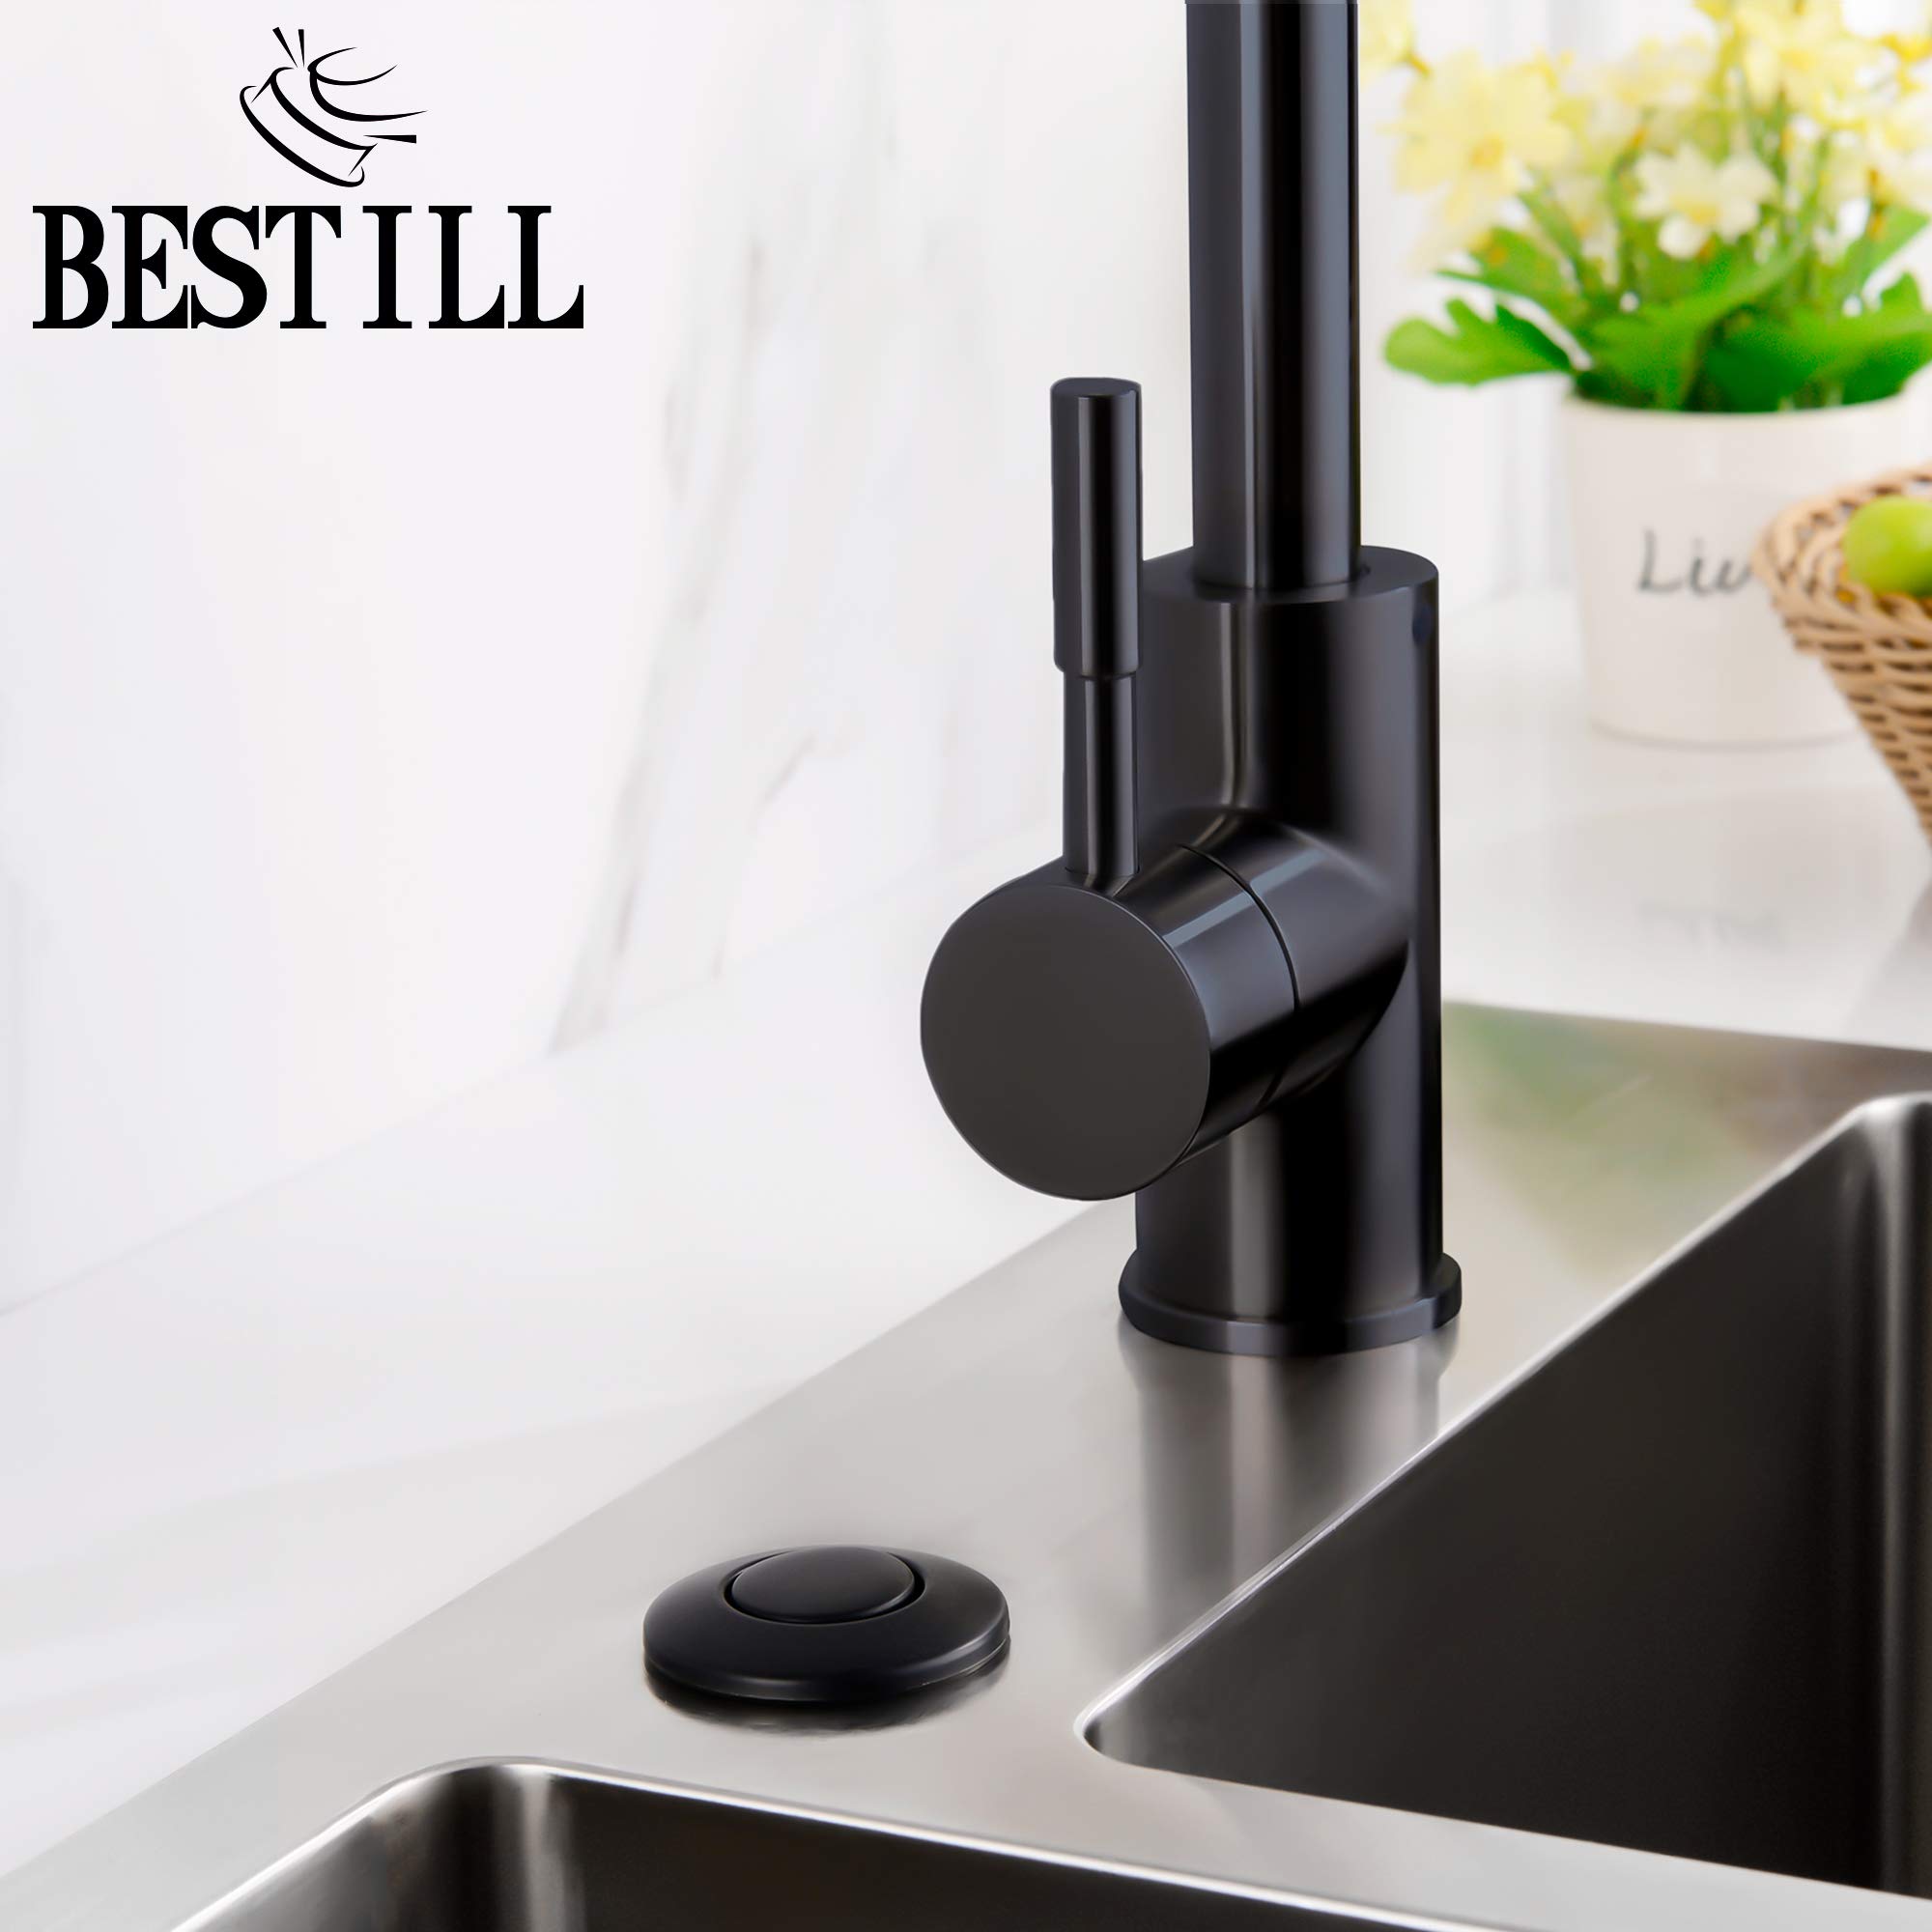 BESTILL Garbage Disposal Sink Top Air Switch Kit with Single Outlet, Matte Black Long Push Button with Brass Cover, UL Listed